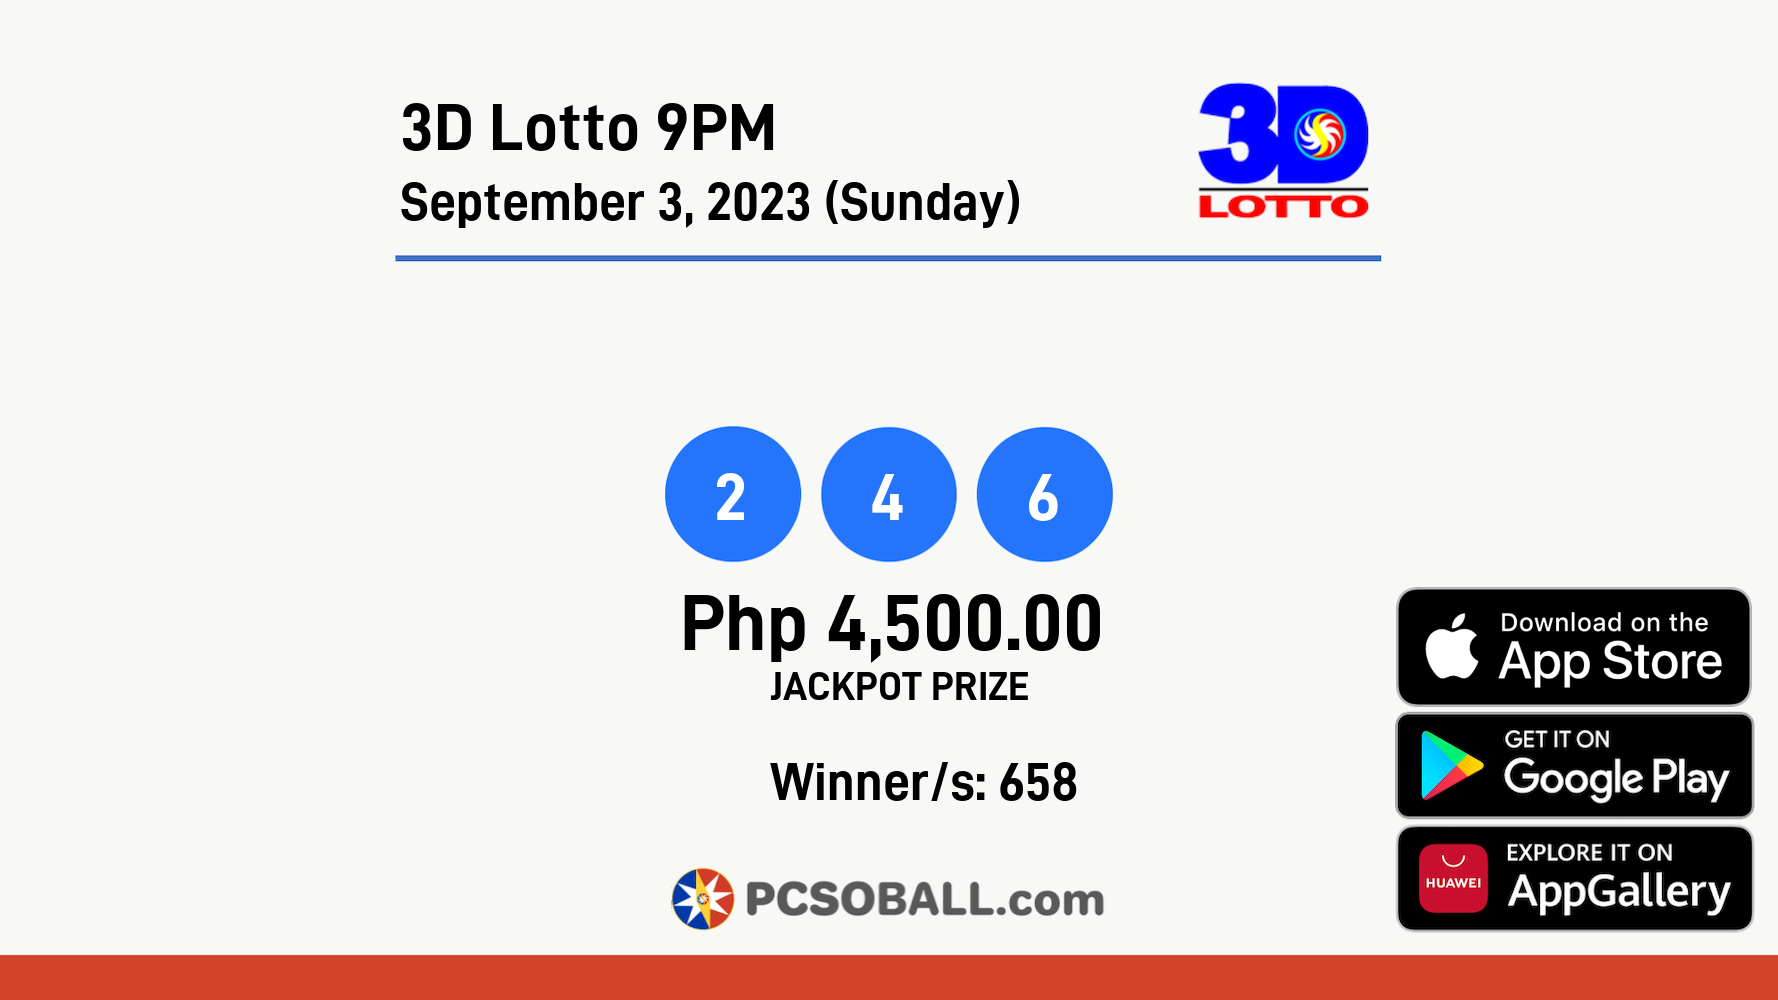 3D Lotto 9PM September 3, 2023 (Sunday) Result